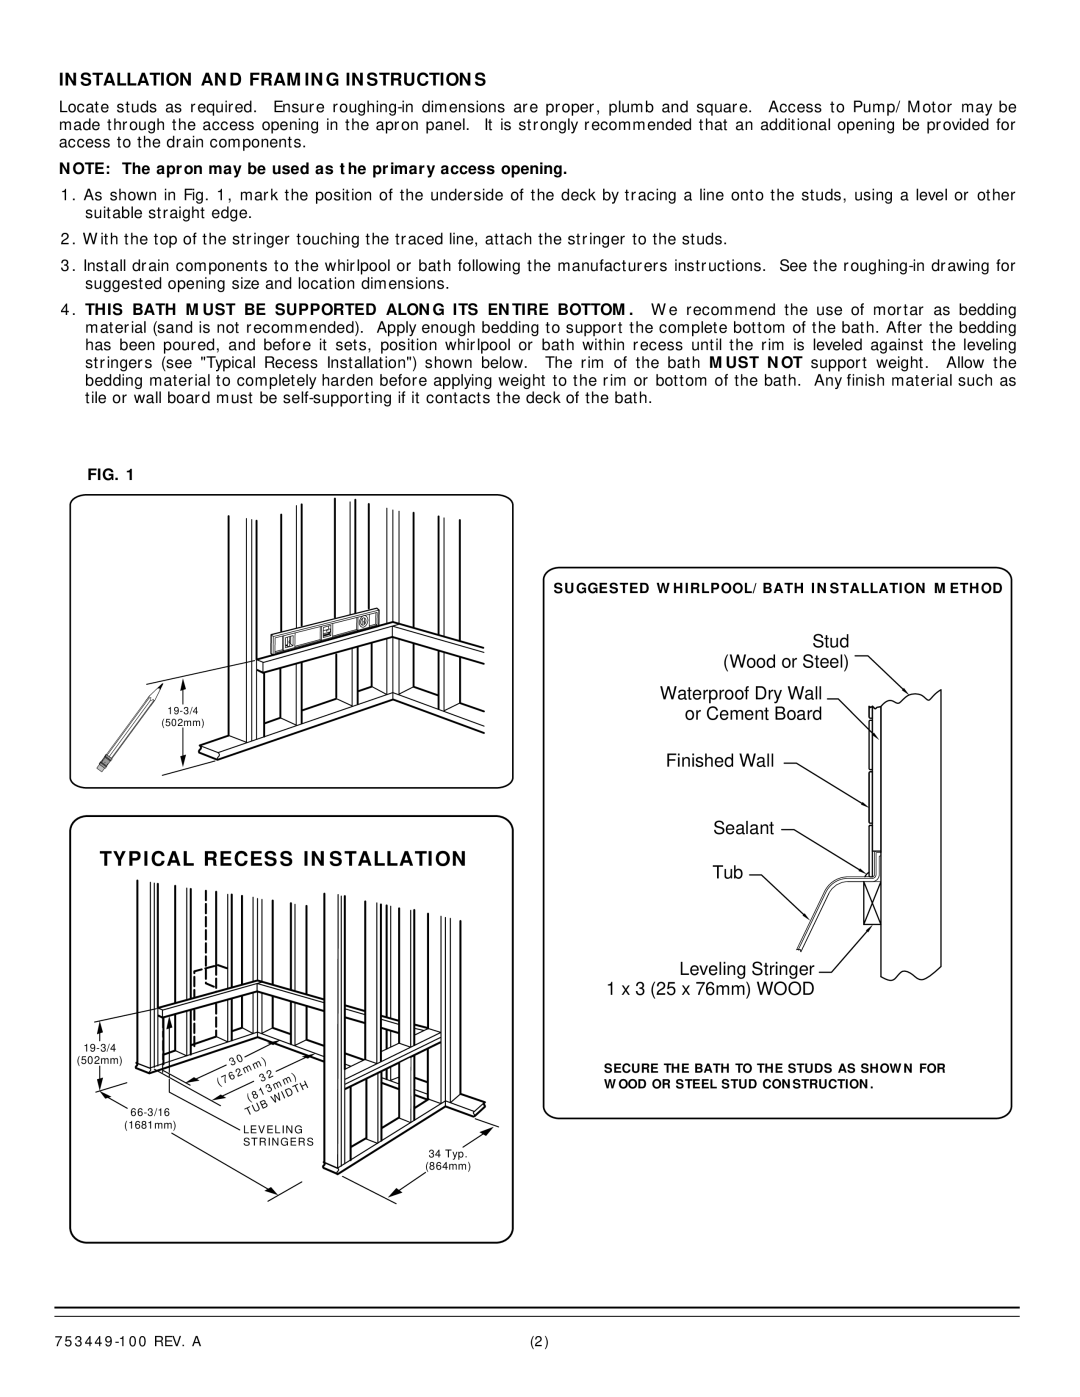 American Standard 1748 Installation And Framing Instructions, Waterproof Dry Wall or Cement Board, Stud Wood or Steel 